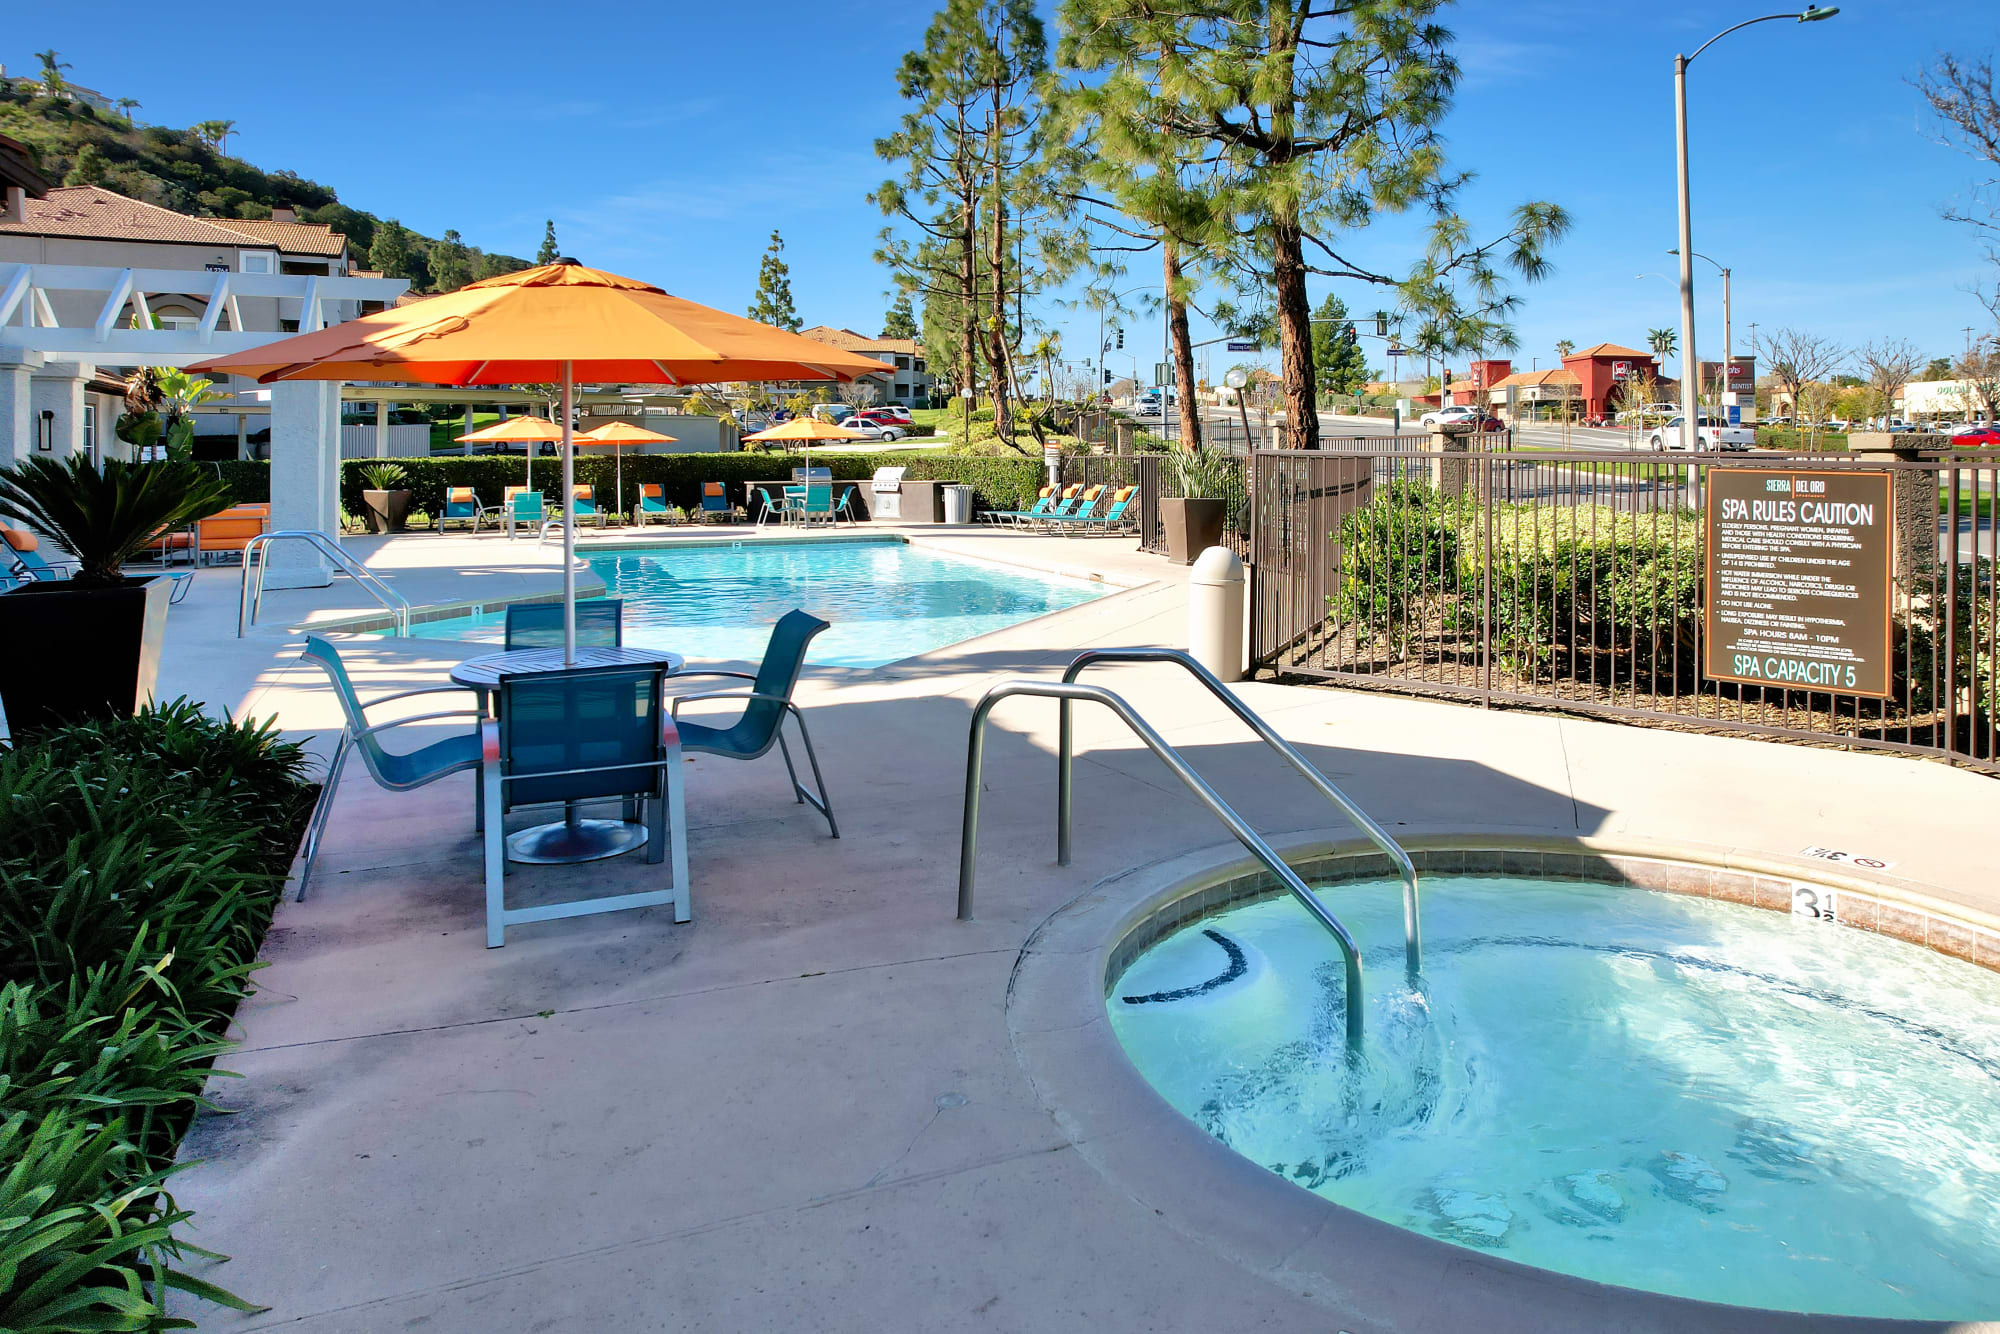 Pool with lounge chairs and umbrellas at Sierra Del Oro Apartments in Corona, California